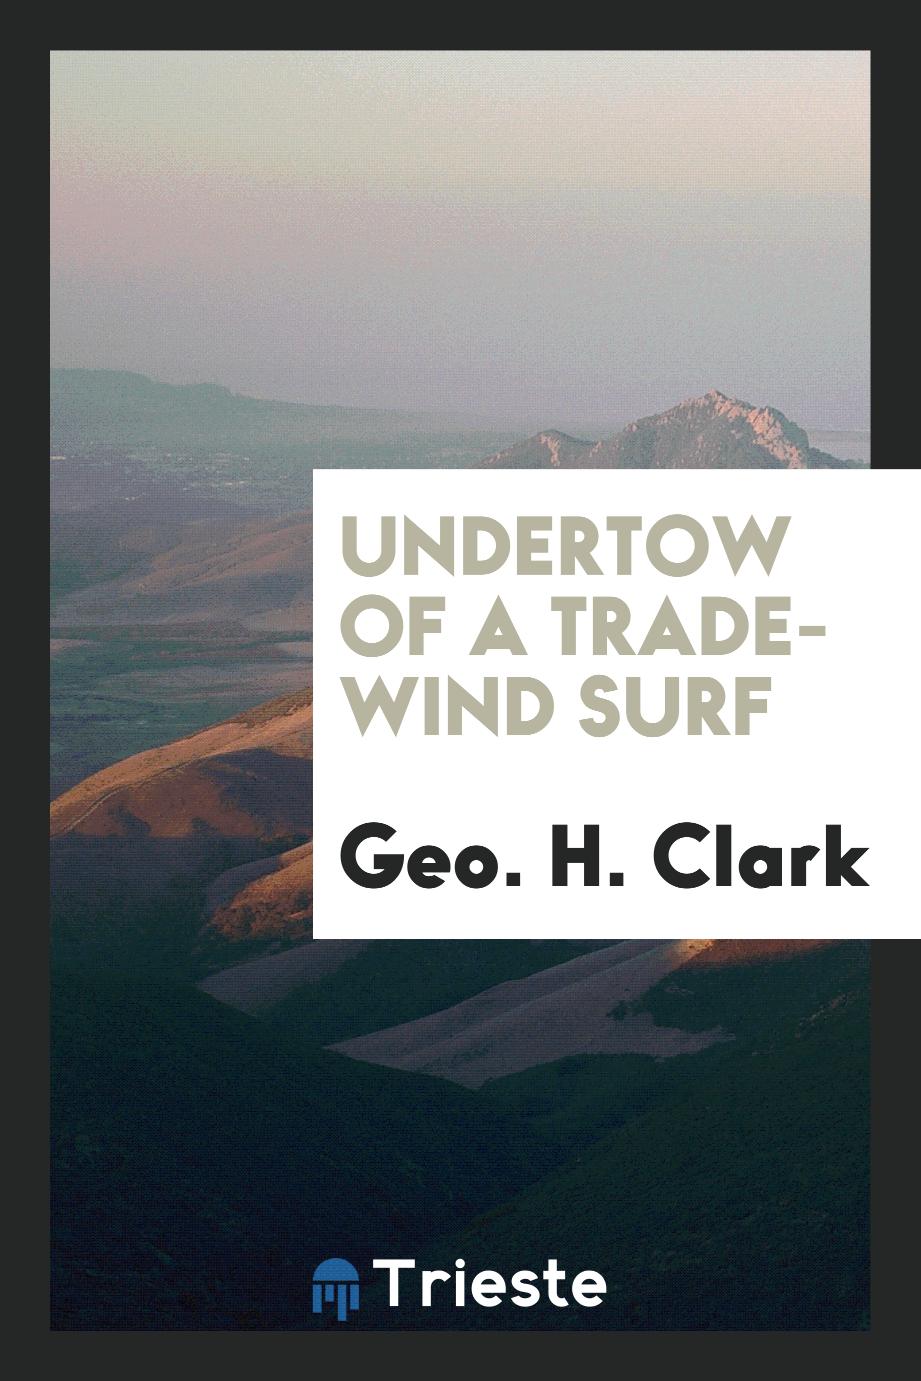 Undertow of a trade-wind surf